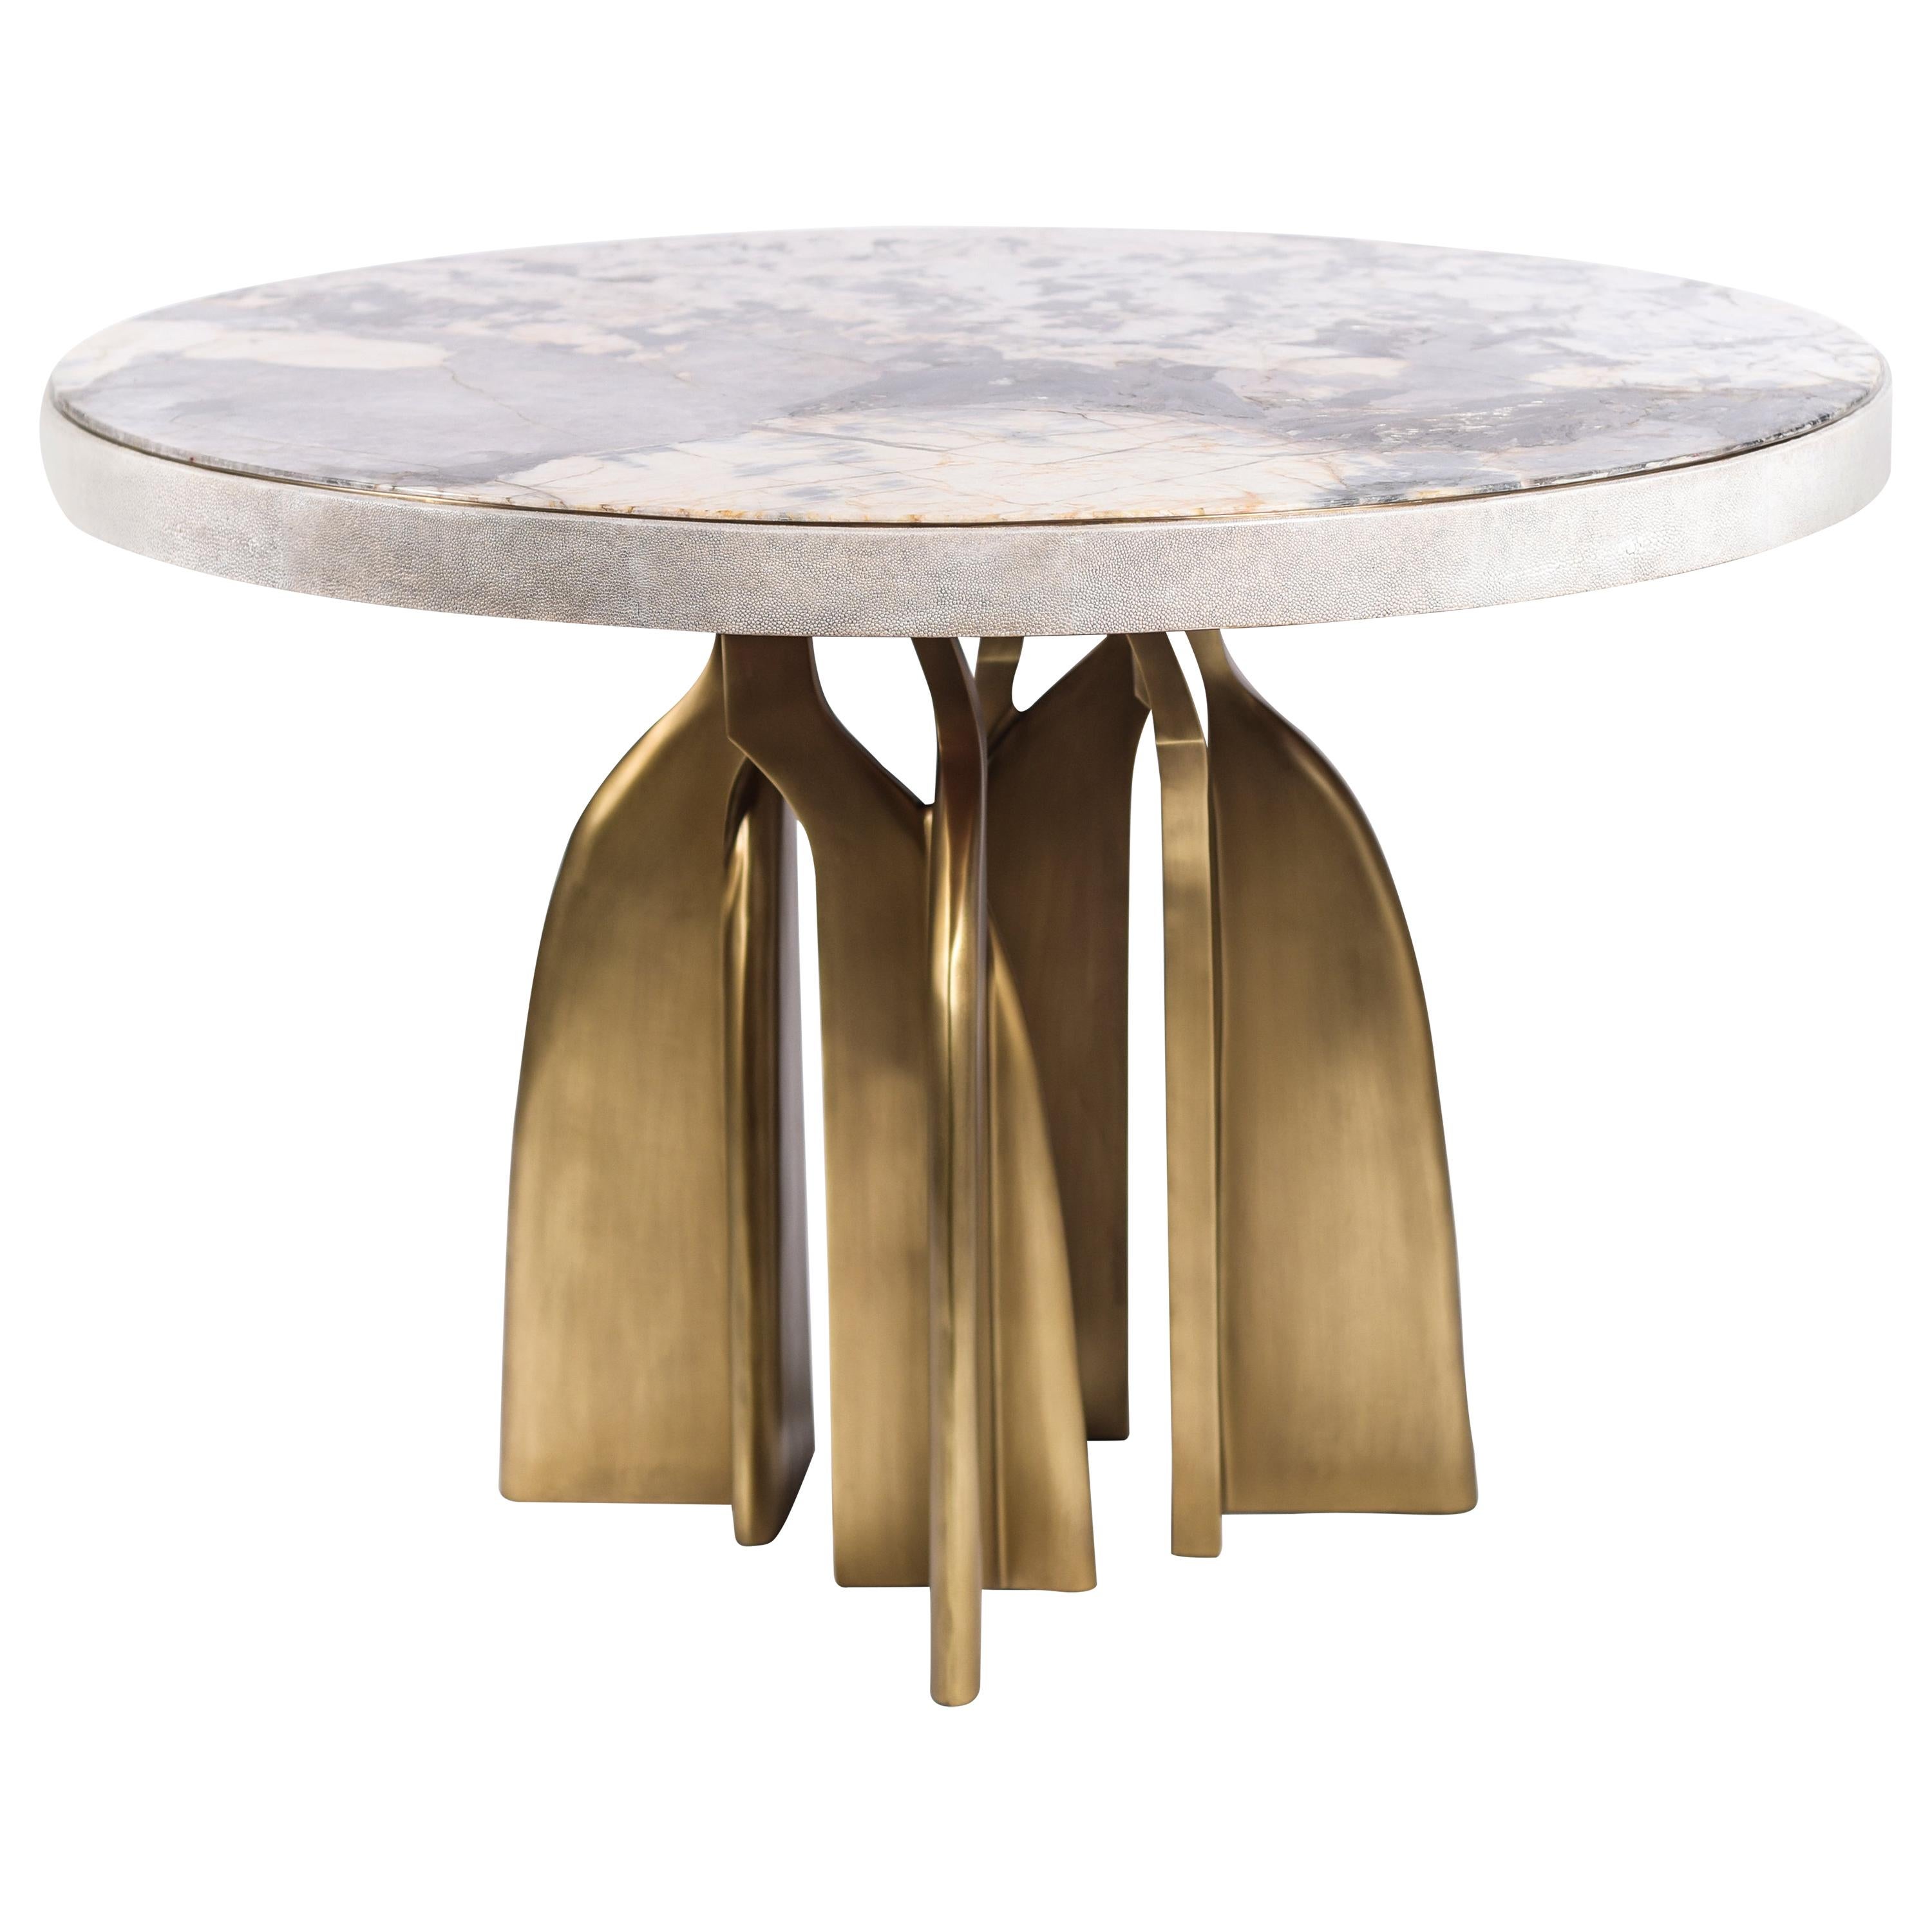 "Chital" Breakfast Table in Cream Shagreen, Patagonia and Brass by Kifu, Paris For Sale